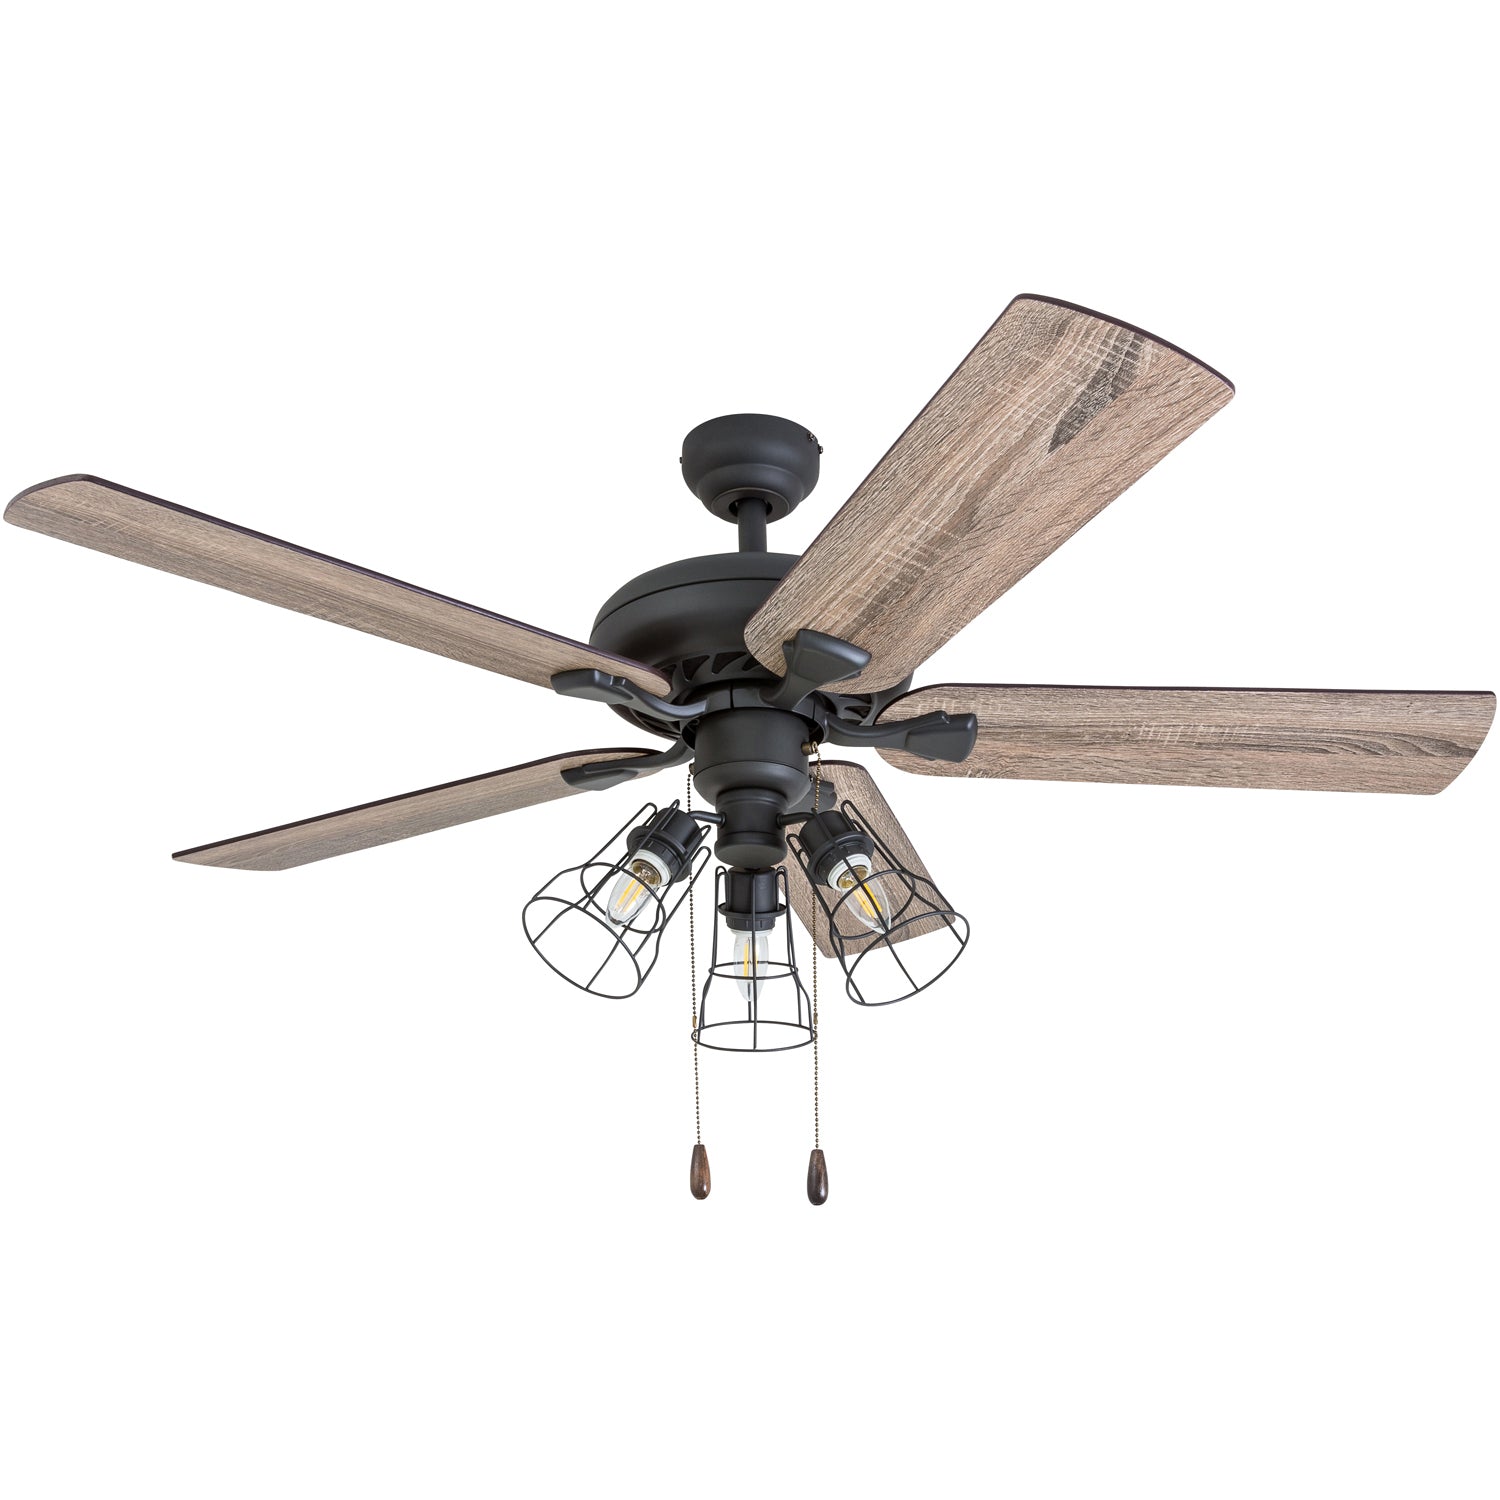 52 Inch Lincoln Woods, Bronze, Pull Chain, Ceiling Fan by Prominence Home